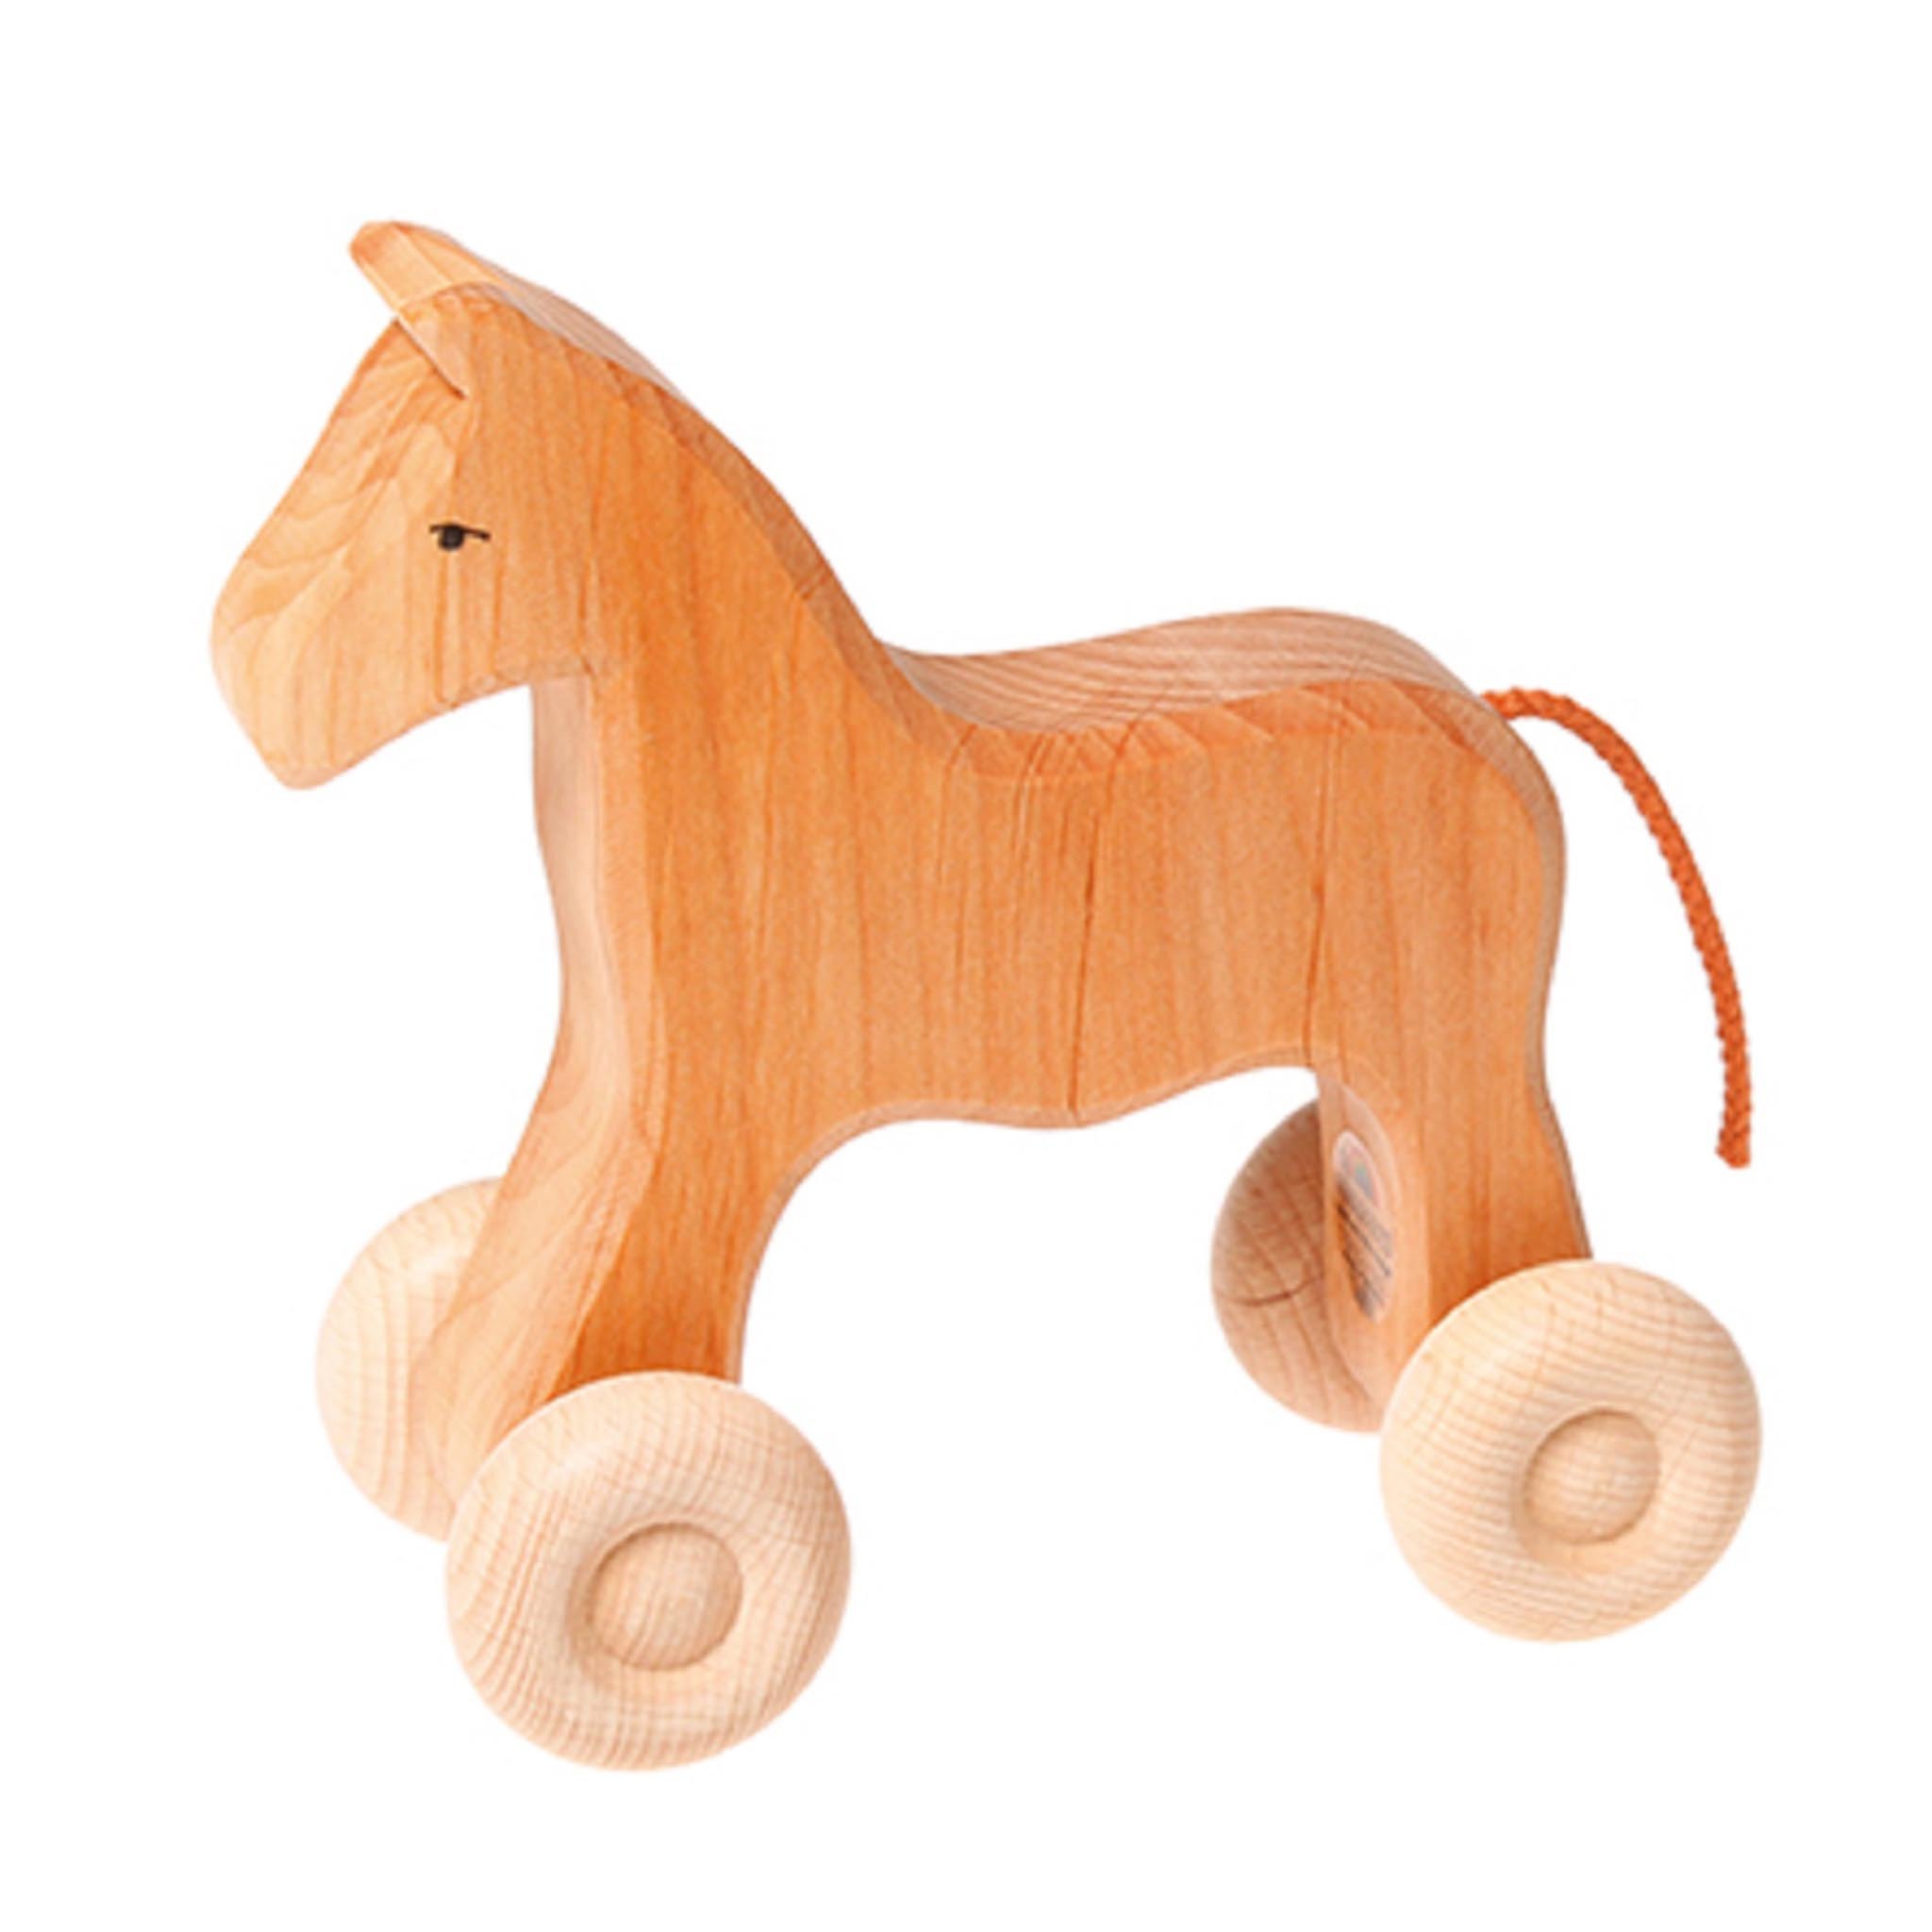 Grimm's wooden horse [large] – One Hundred Toys